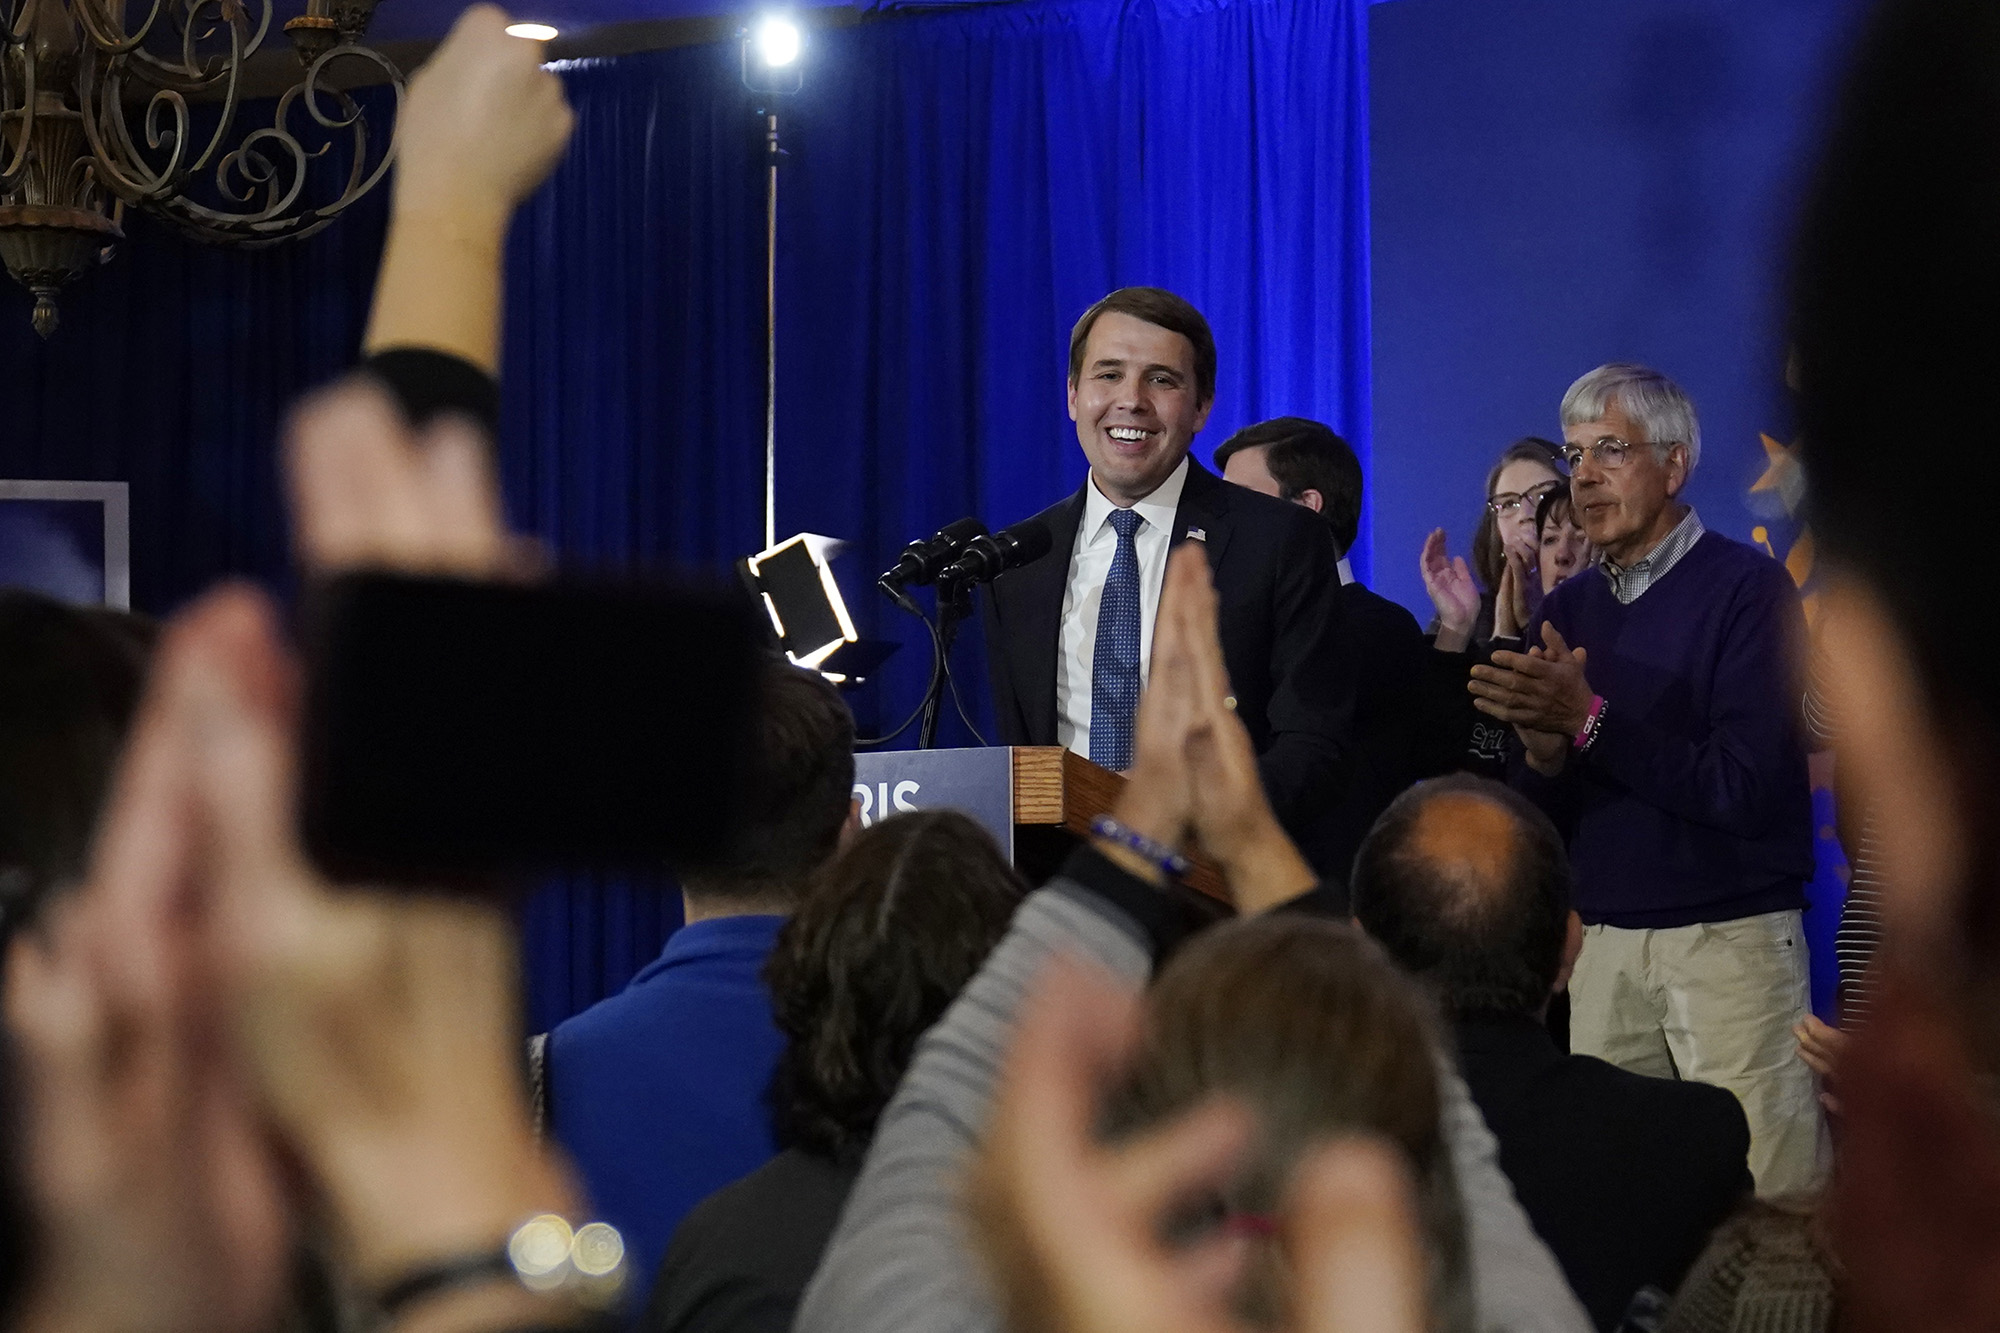 Rep. Chris Pappas is congratulated by supporters at an election night gathering in Manchester, New Hampshire on Tuesday, November 8.